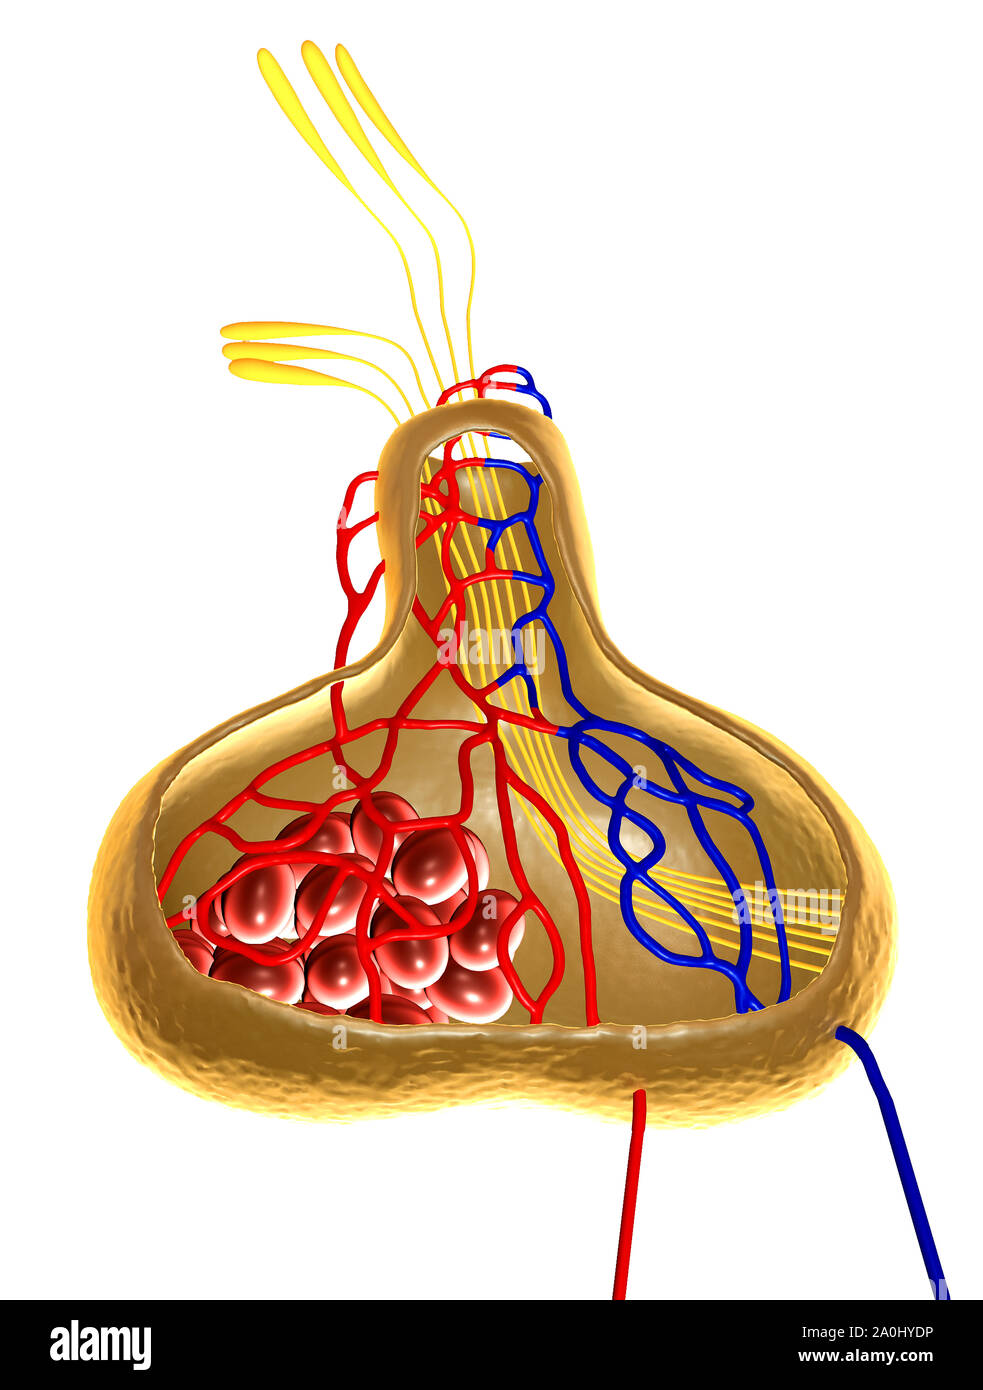 Internal organs in a human body, part of brain, illustration of pituitary gland Stock Photo